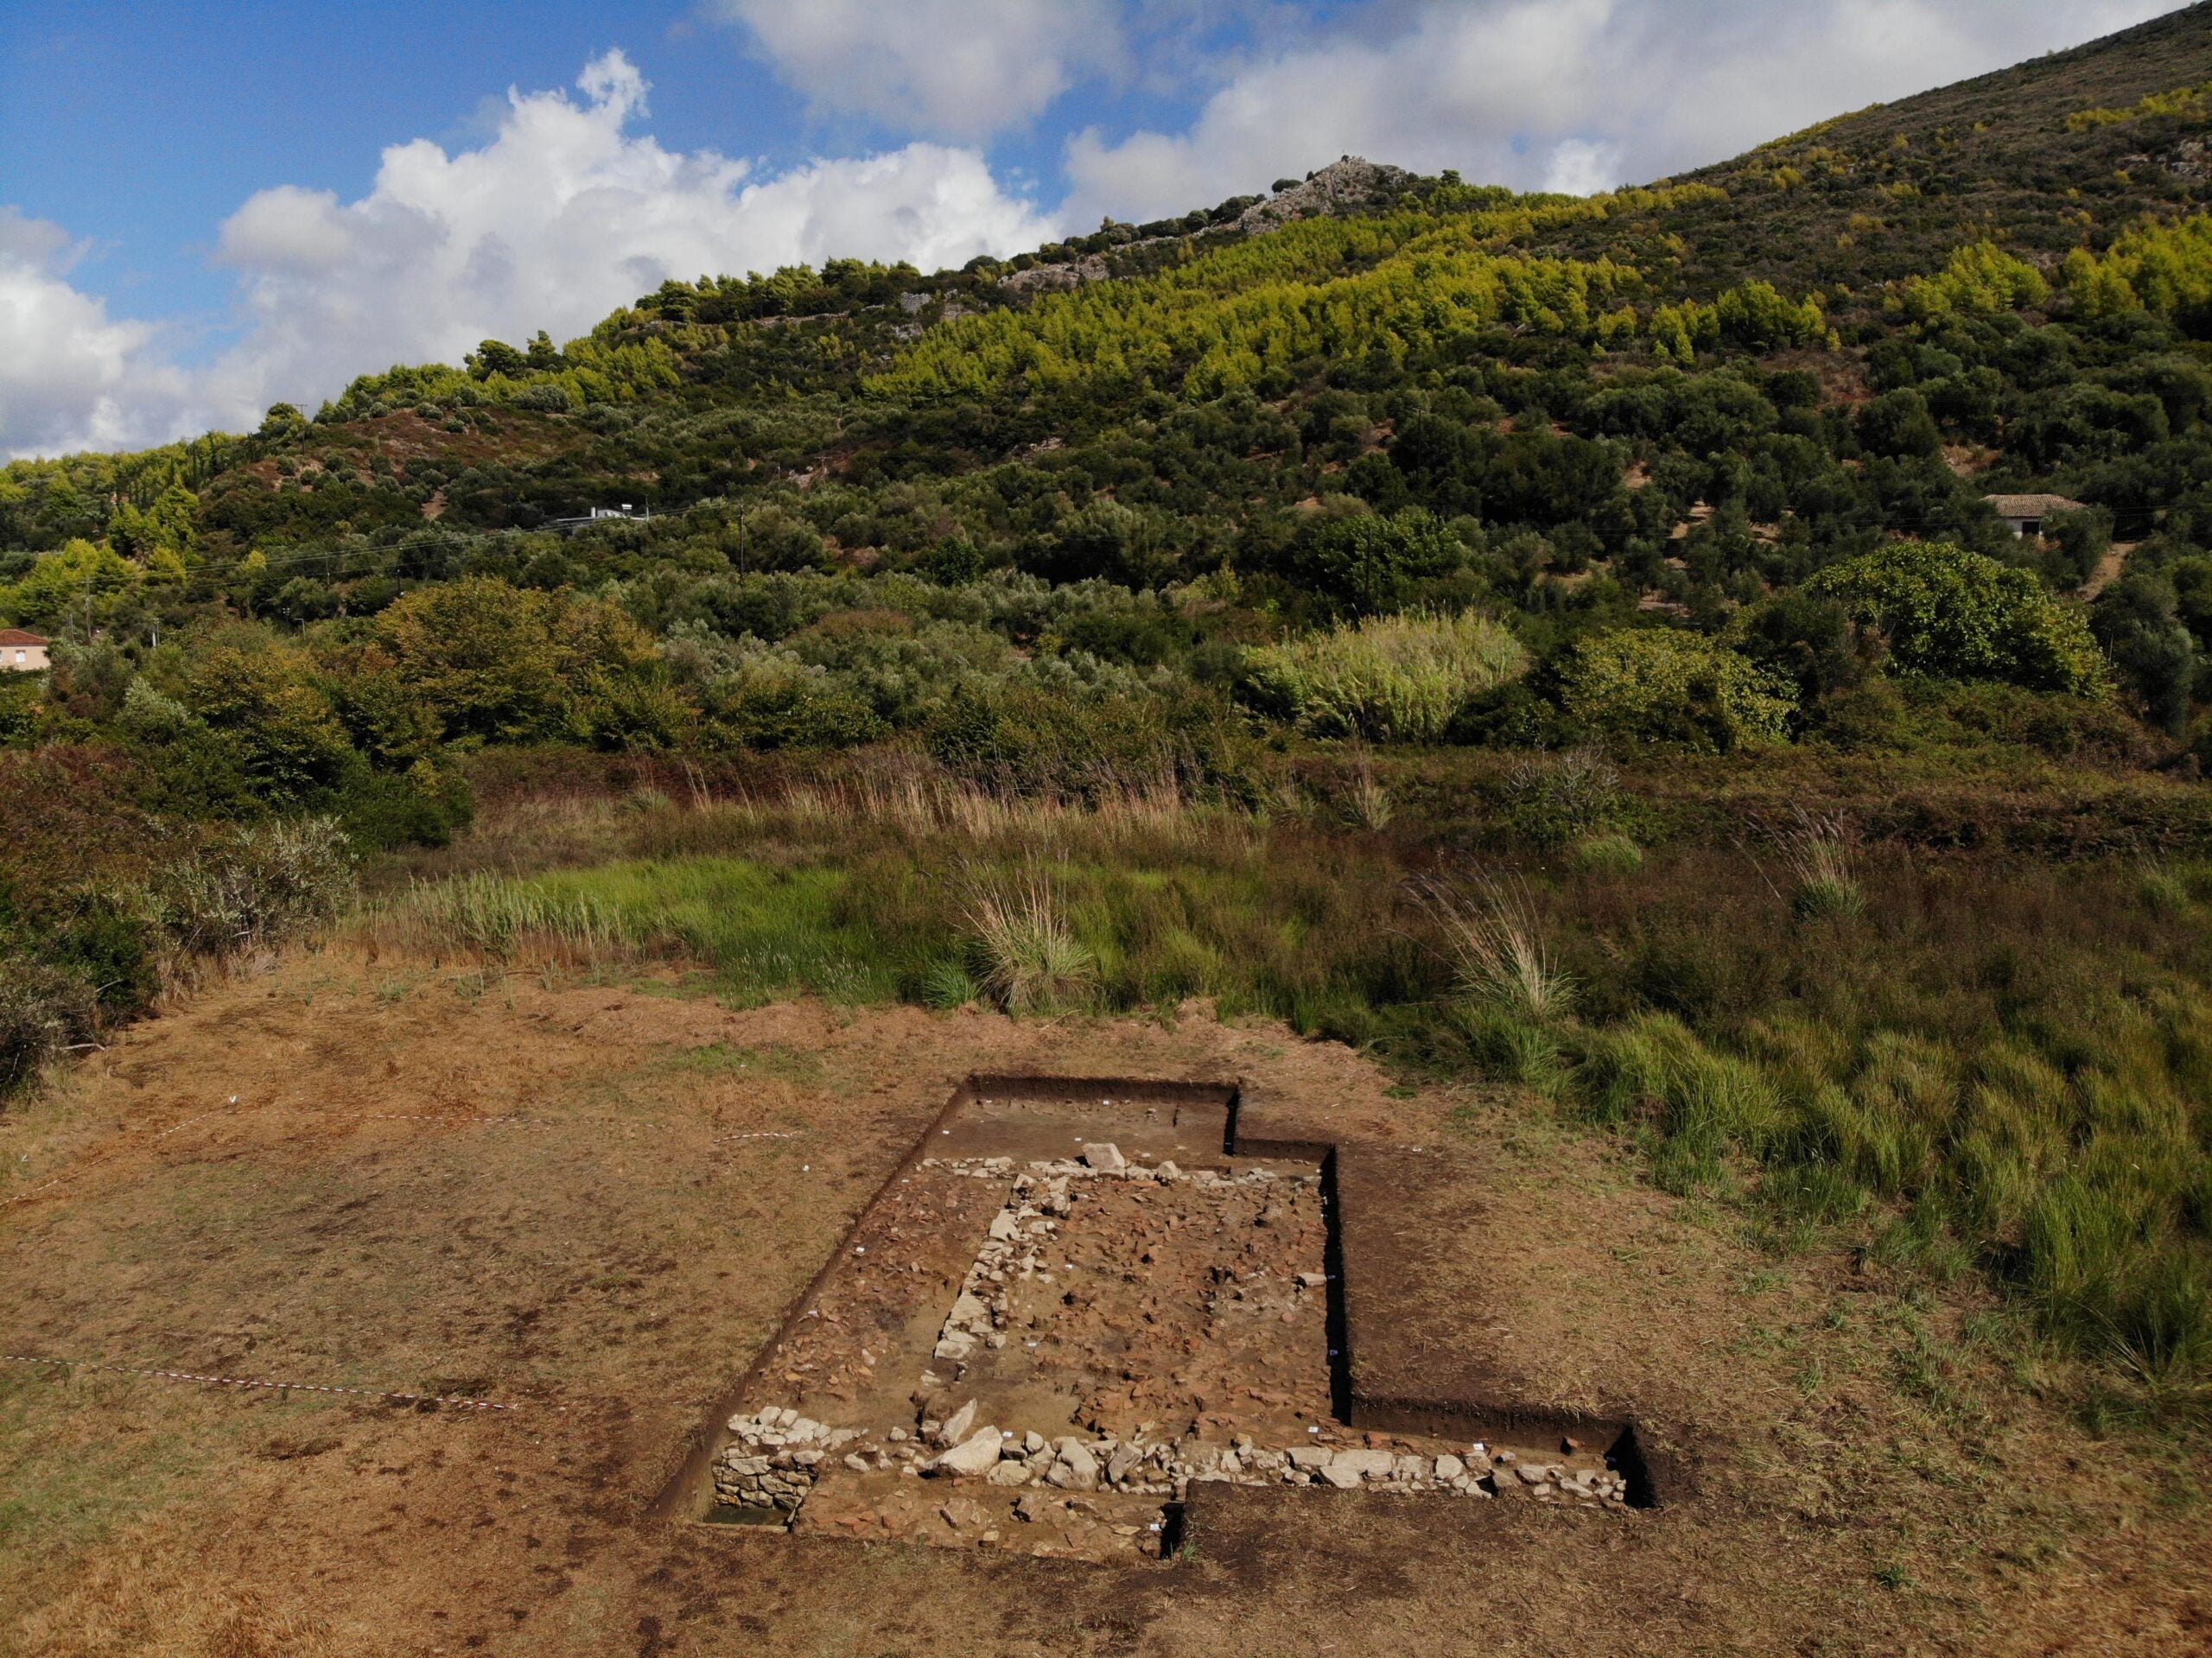 A lost temple for Poseidon may have finally been rediscovered